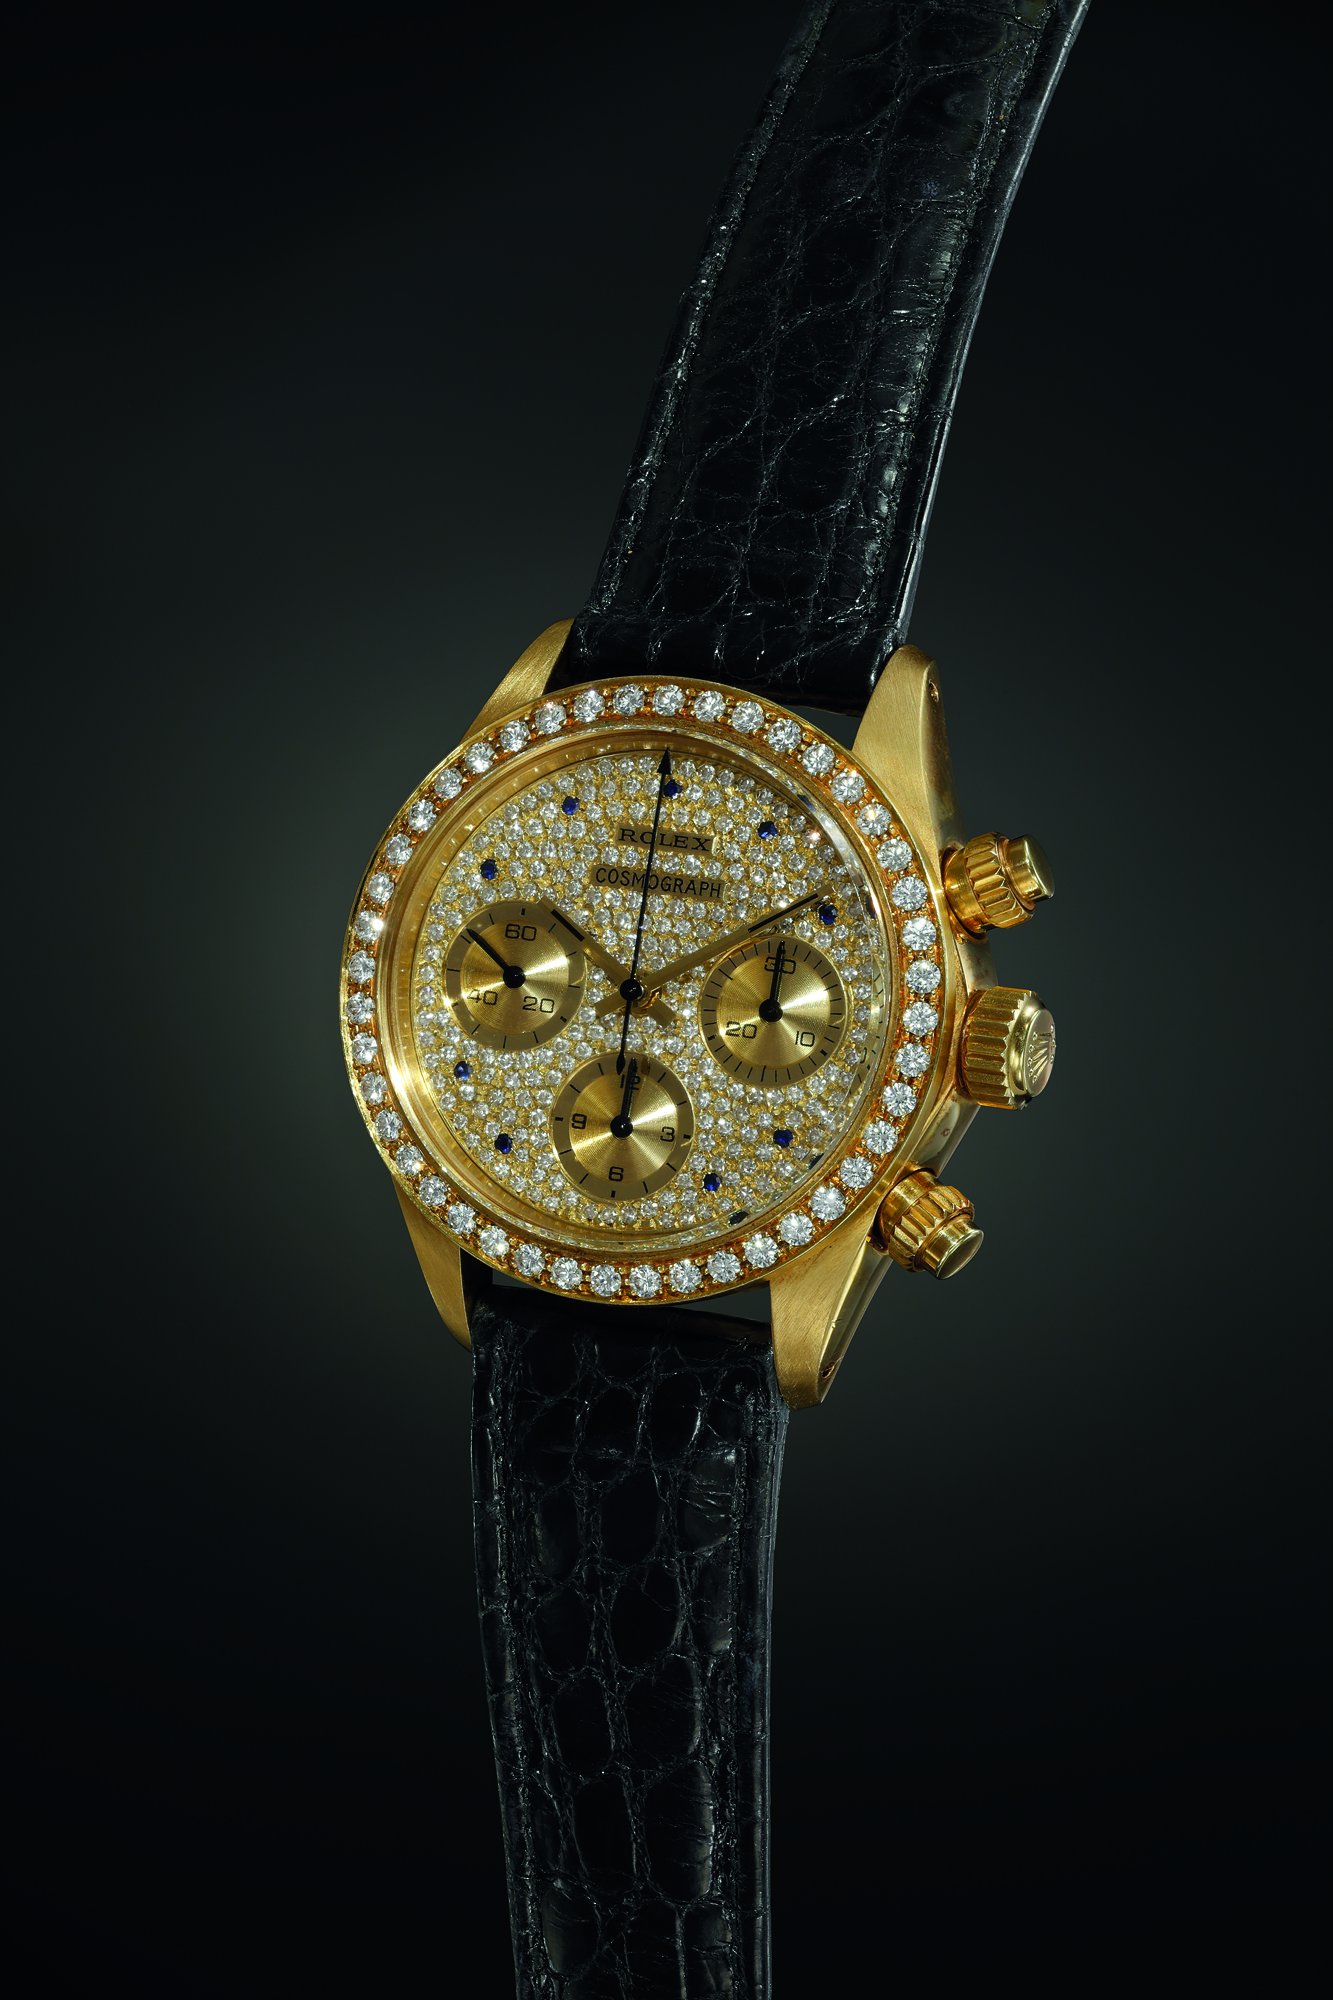 An exceedingly exclusive and lavish diamond and sapphire-set yellow gold chronograph wristwatch, made for the French market. Realised CHF 606,500